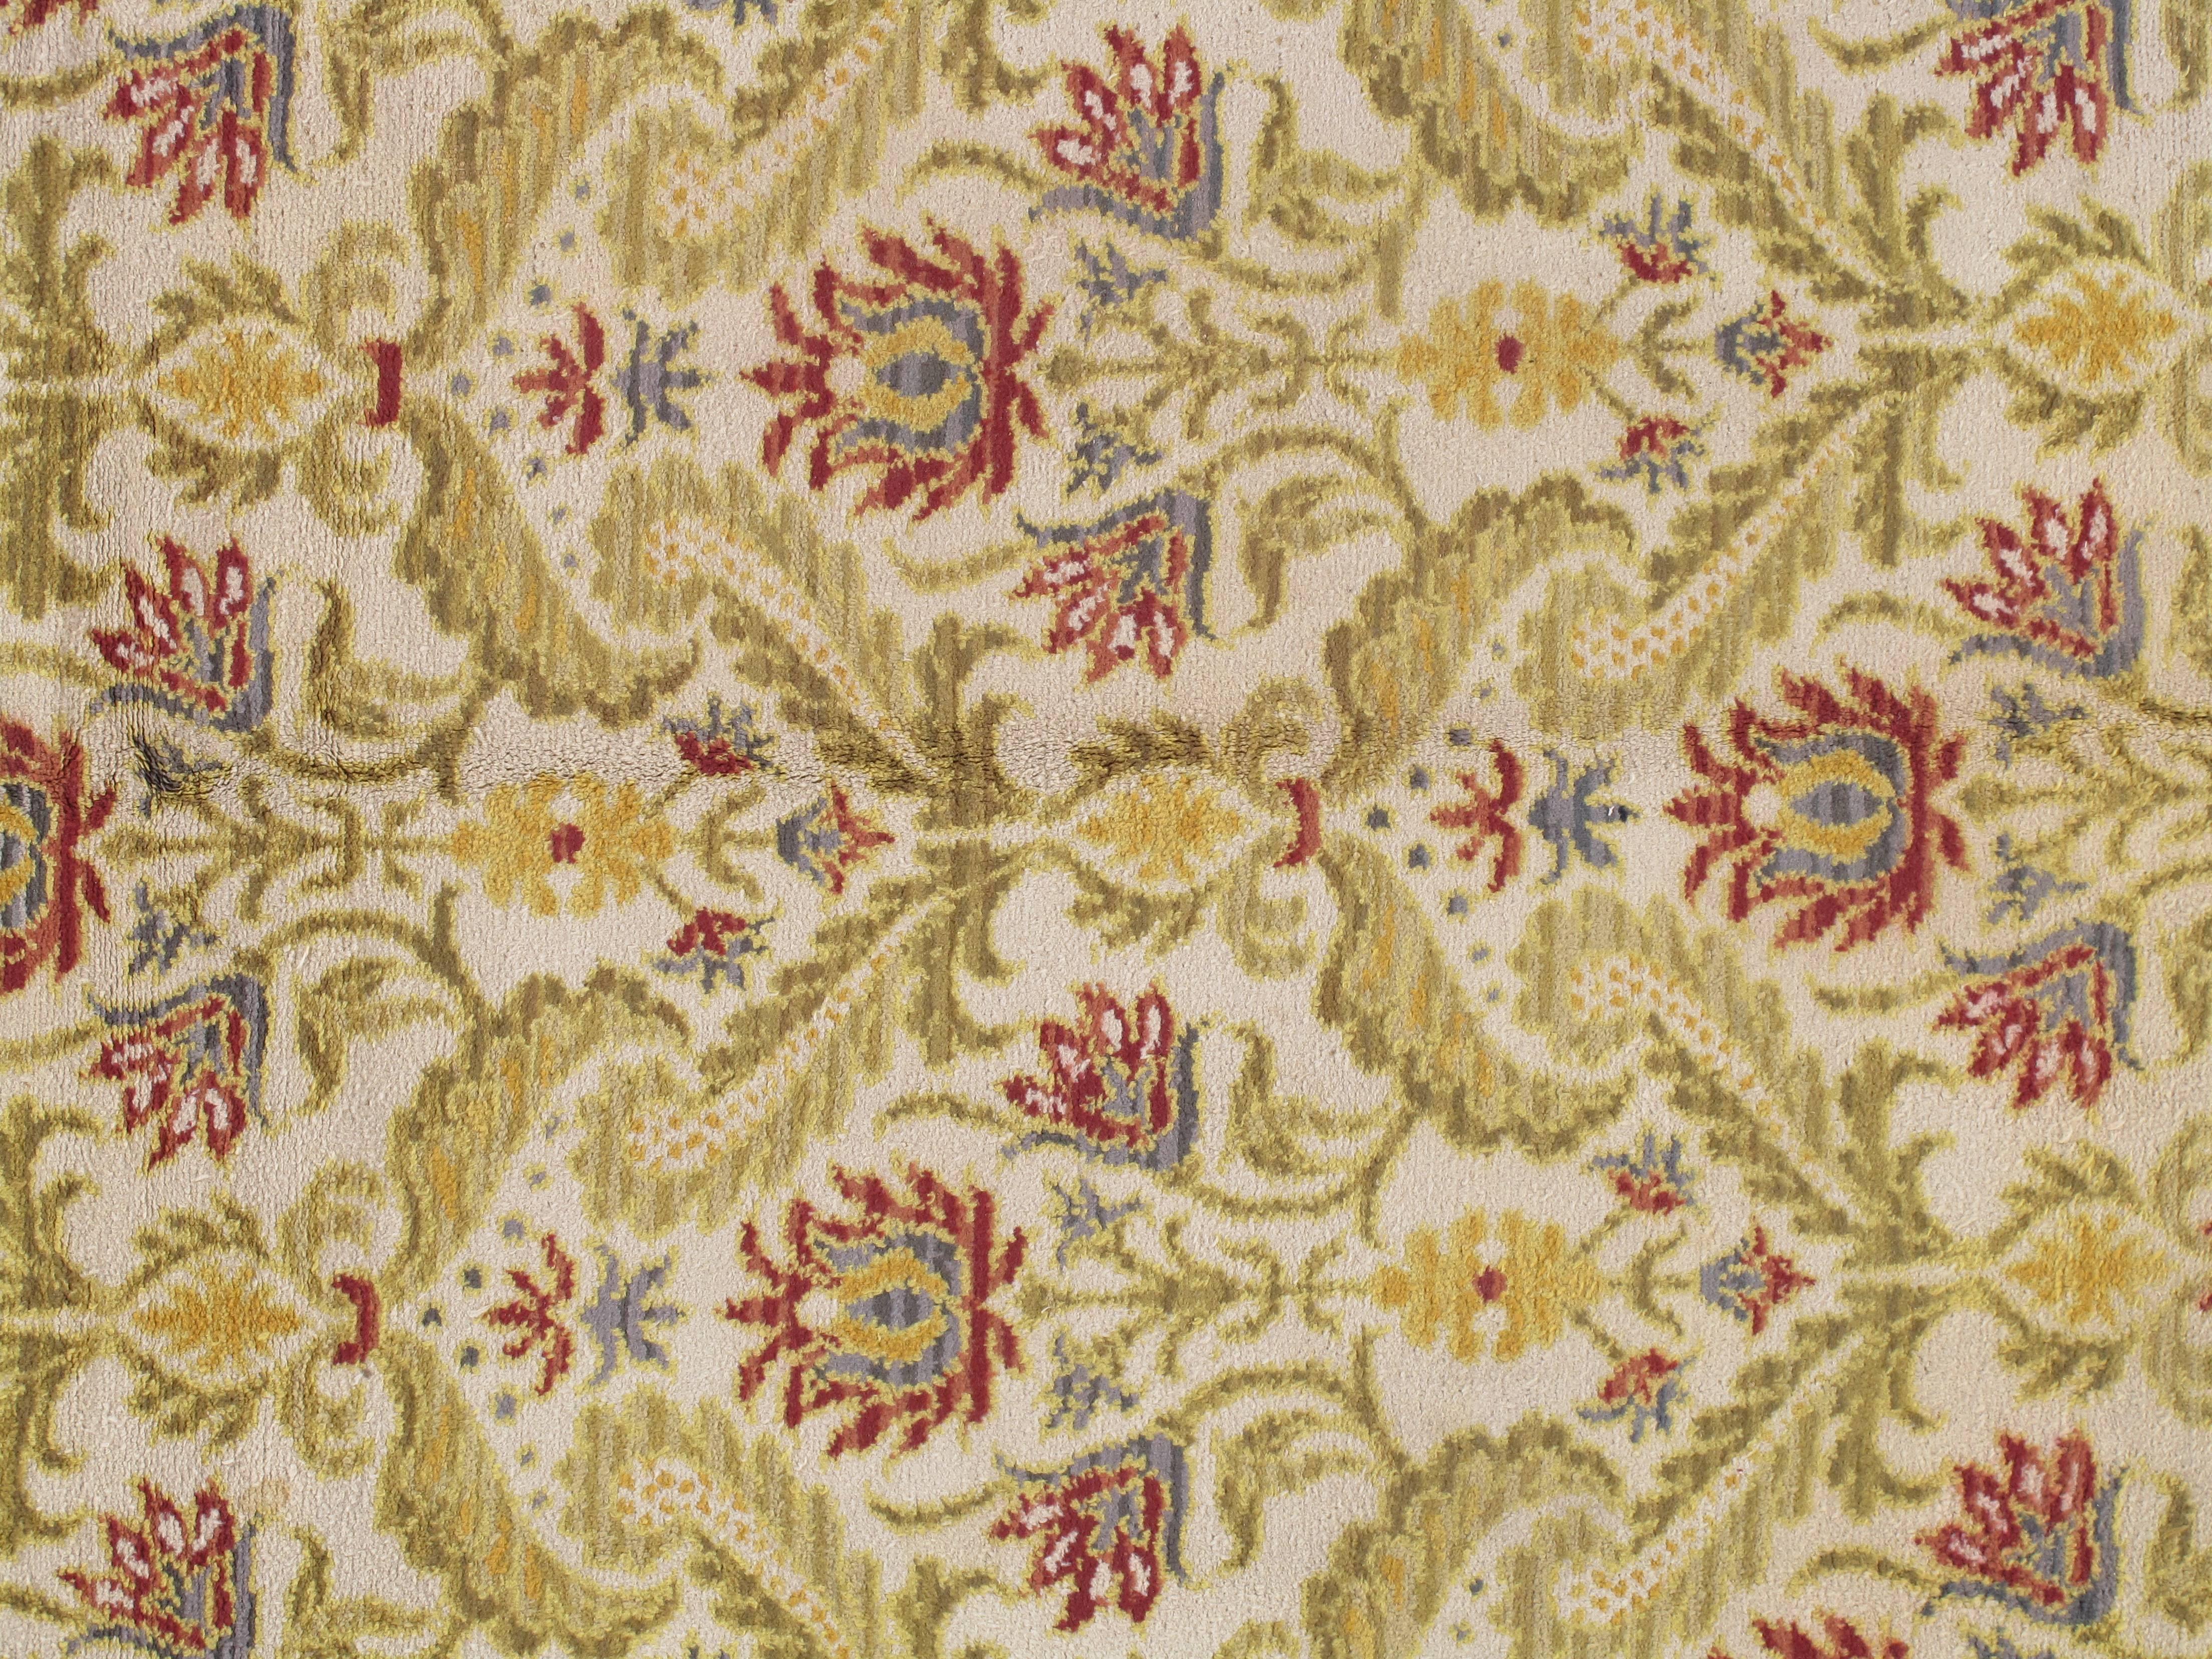 This is a hand-knotted, finely woven antique Portuguese carpet, having a all-over floral pattern. Measures: 10 x 13.